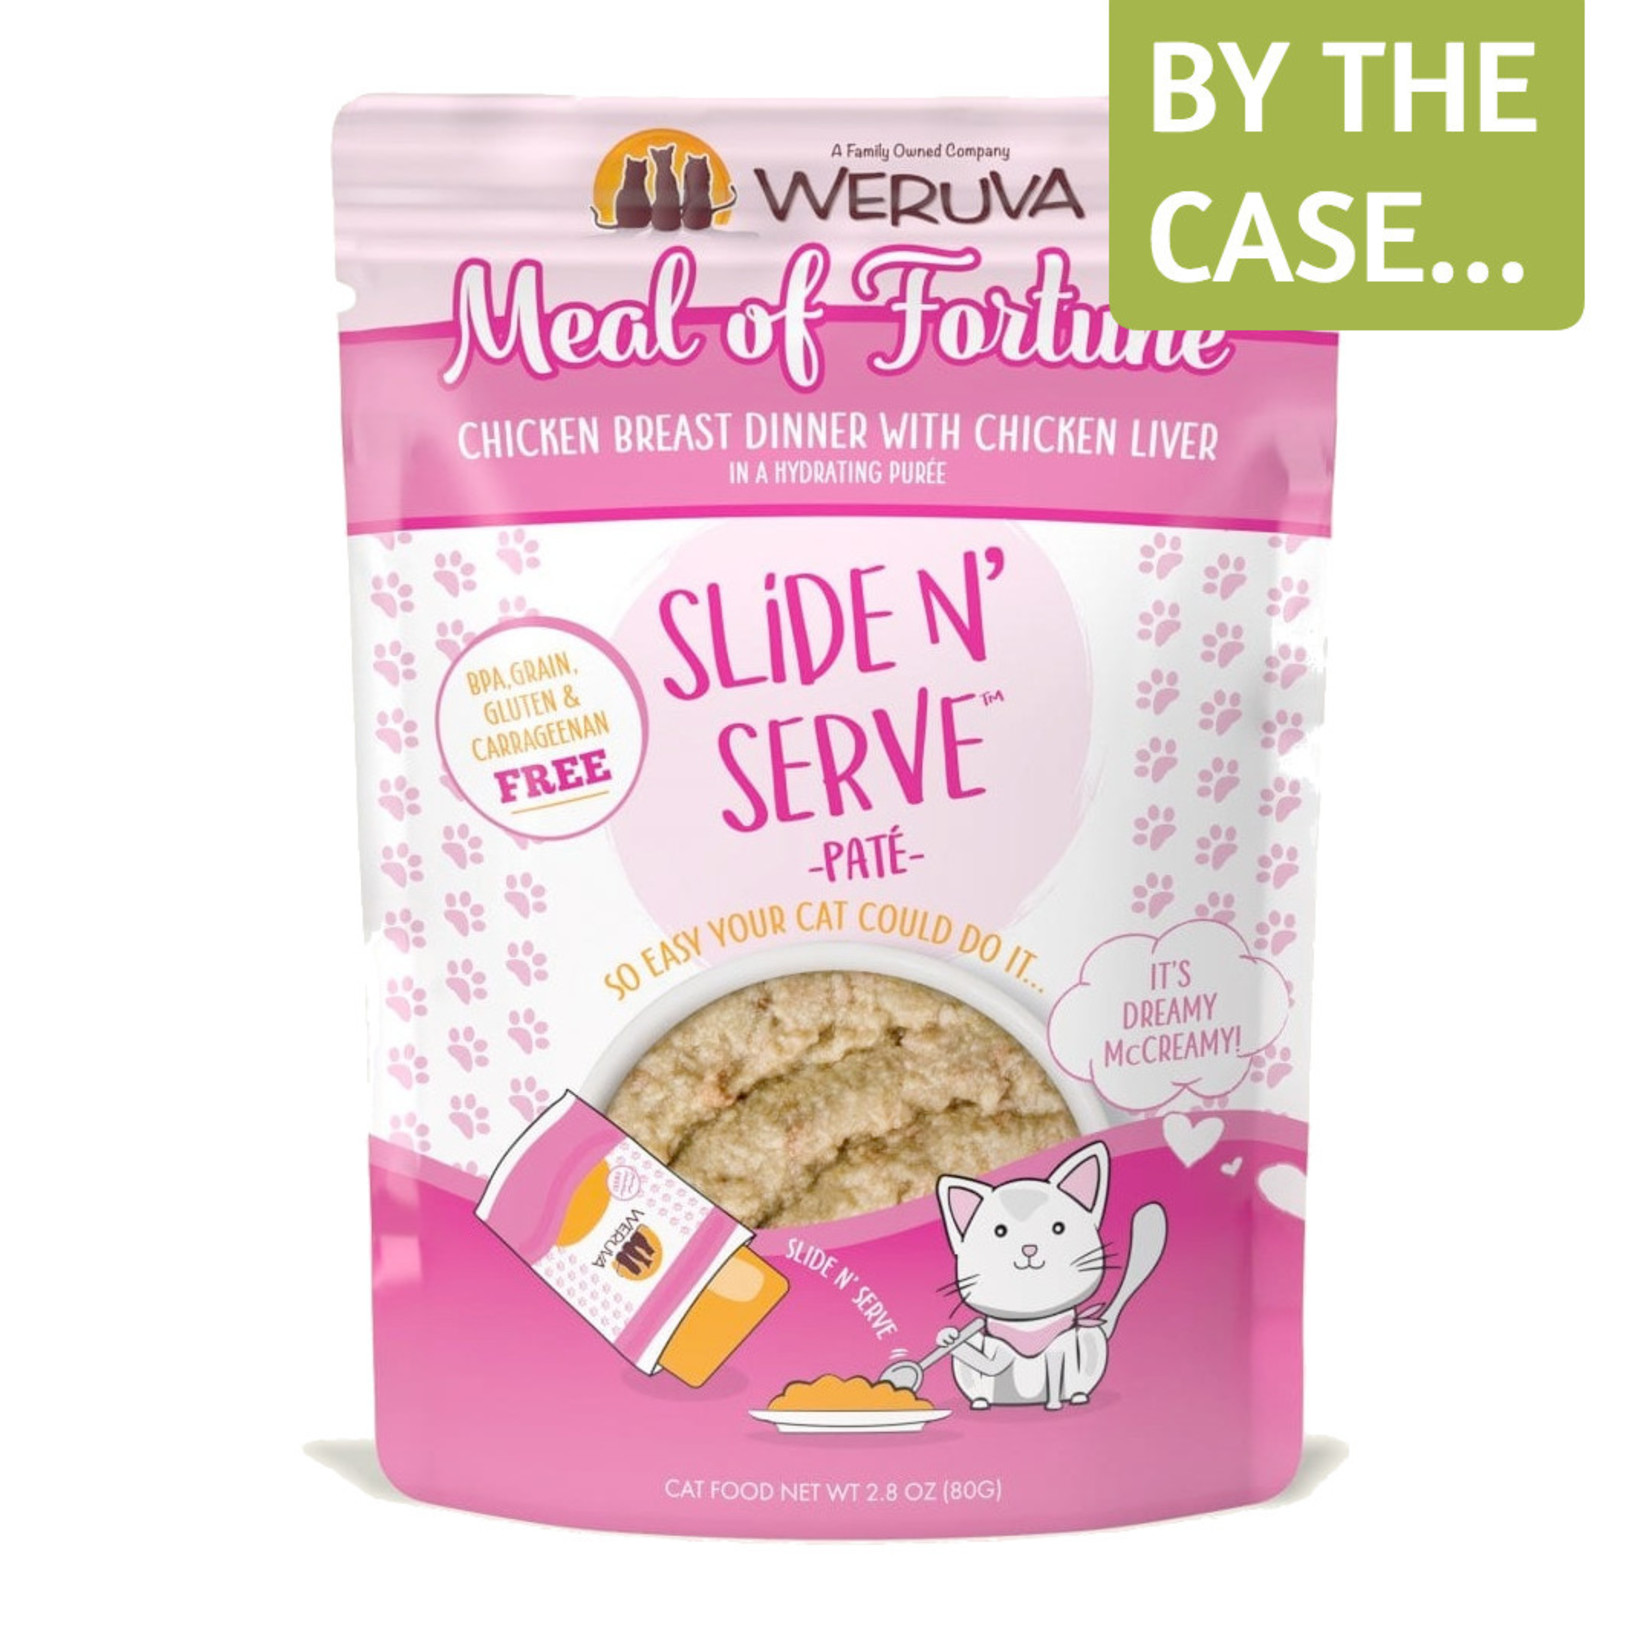 Weruva Weruva Wet Cat Food Slide & Serve Pate Meal of Fortune Chicken Breast Dinner With Chicken Liver in a Hydrating Puree 2.8oz Pouch